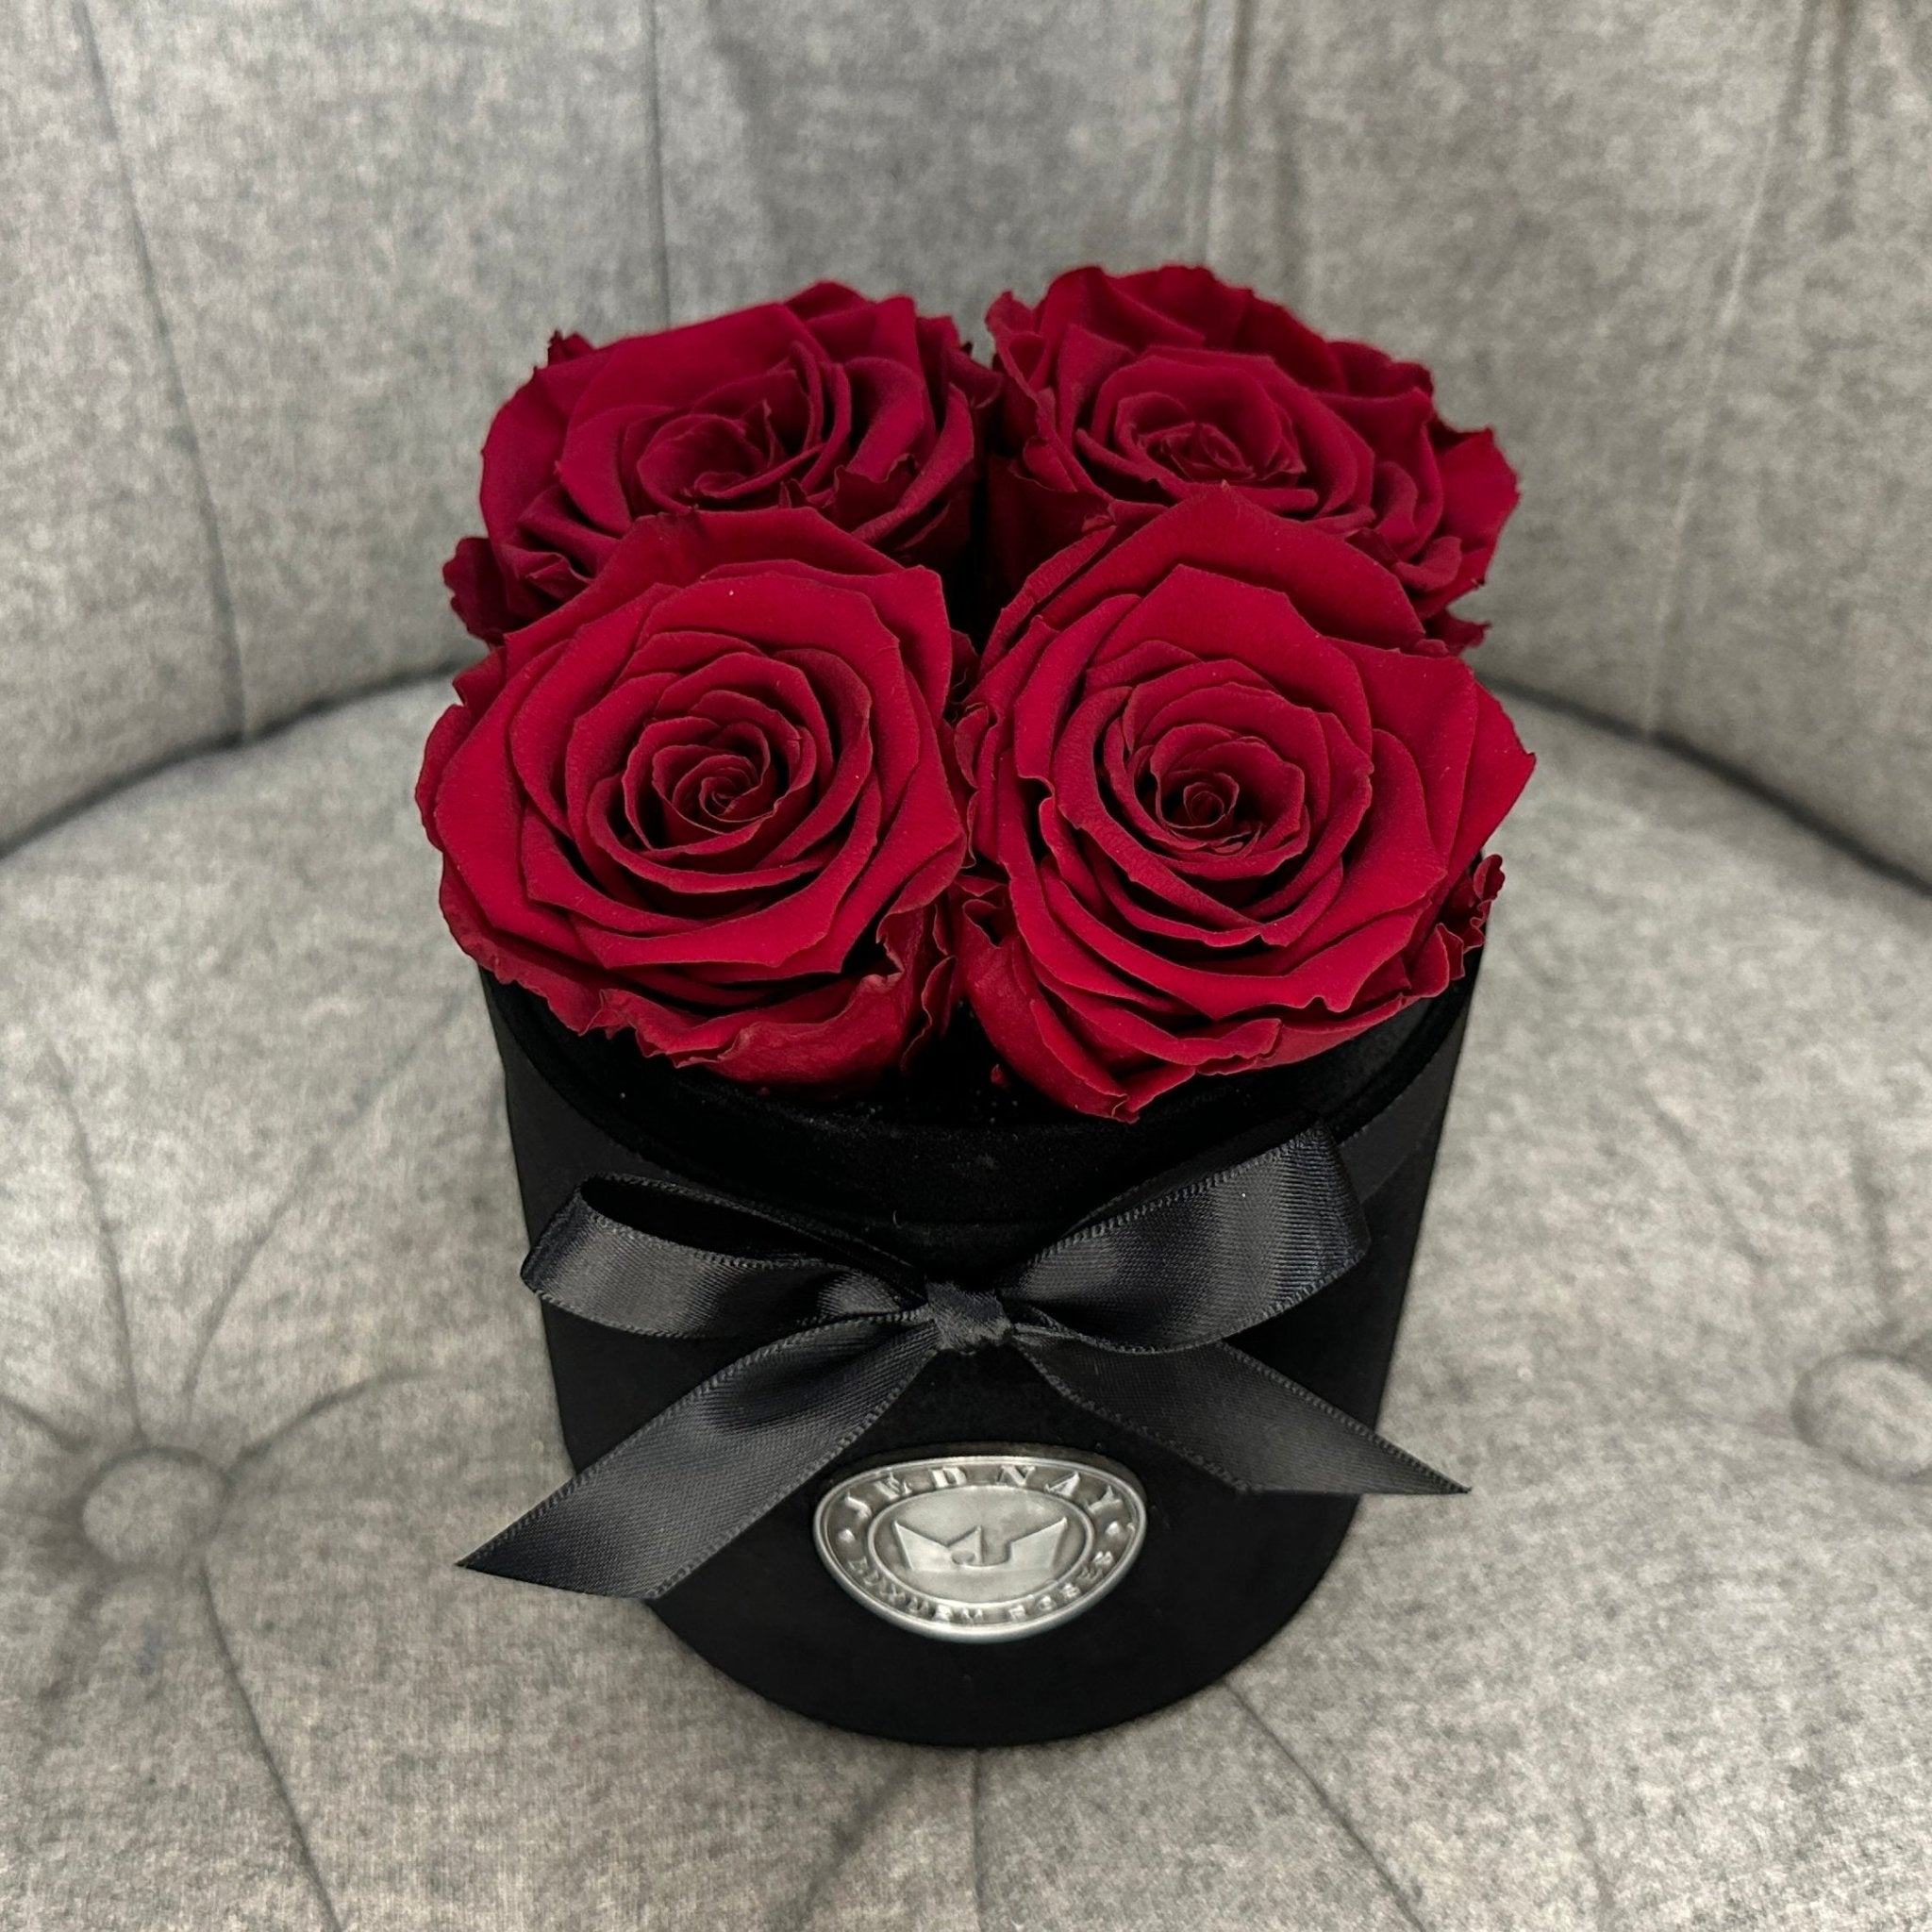 Petite Black Suede Forever Rose Box - Red Red Wine Eternal Roses - Jednay Roses